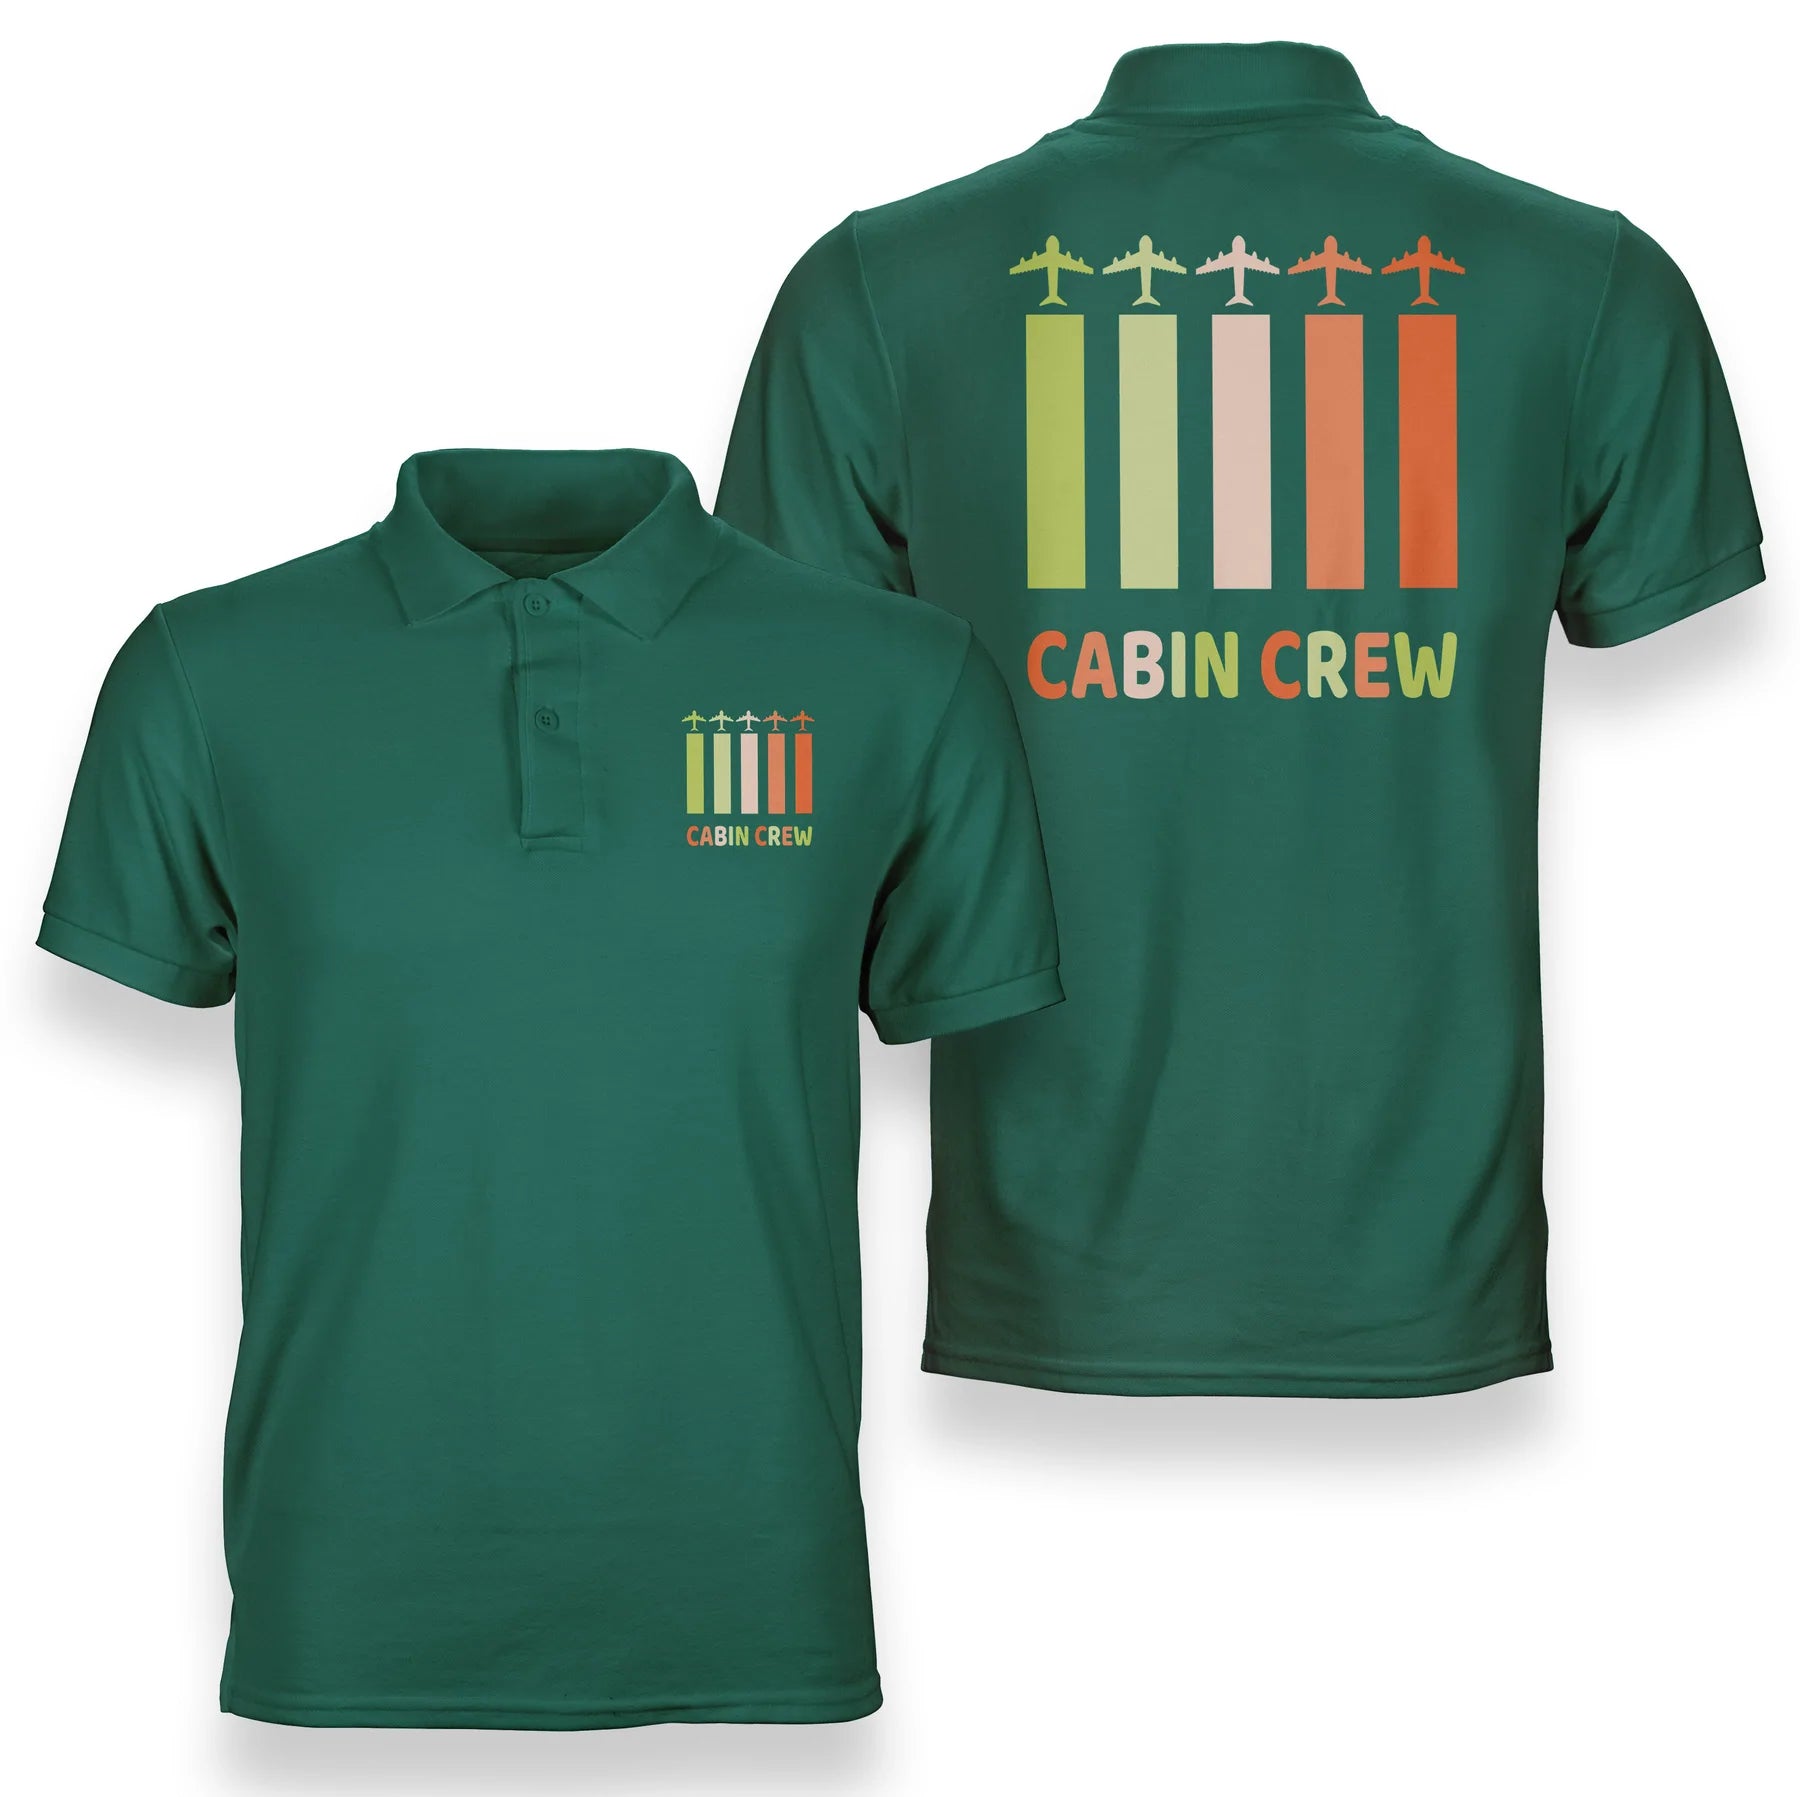 Colourful Cabin Crew Designed Double Side Polo T-Shirts